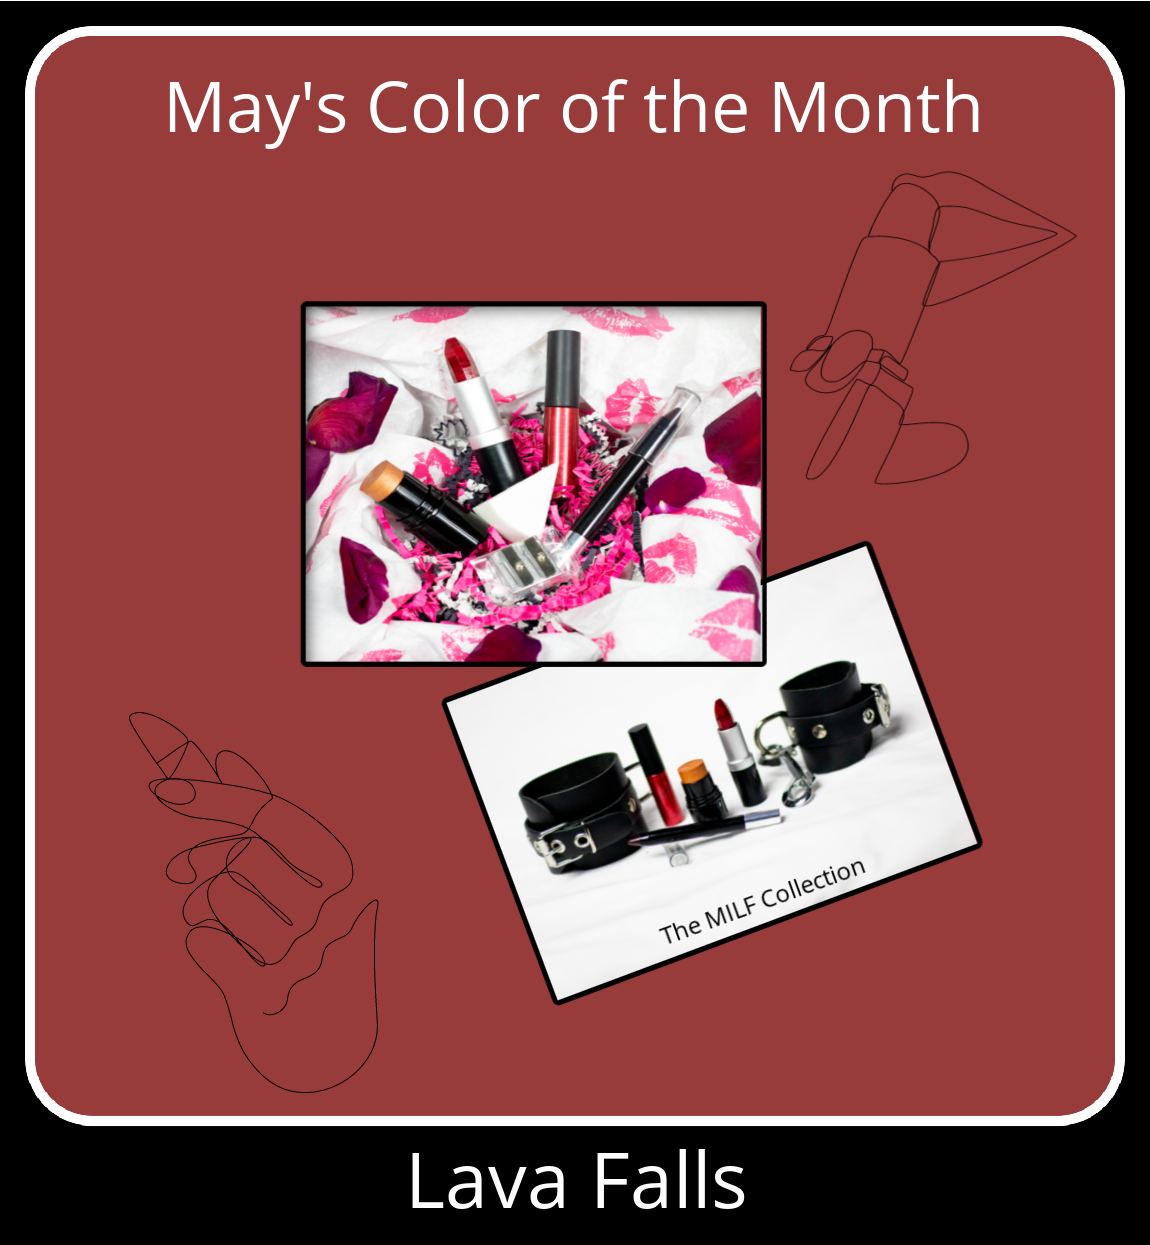 May's Color of the Month is Lava Falls